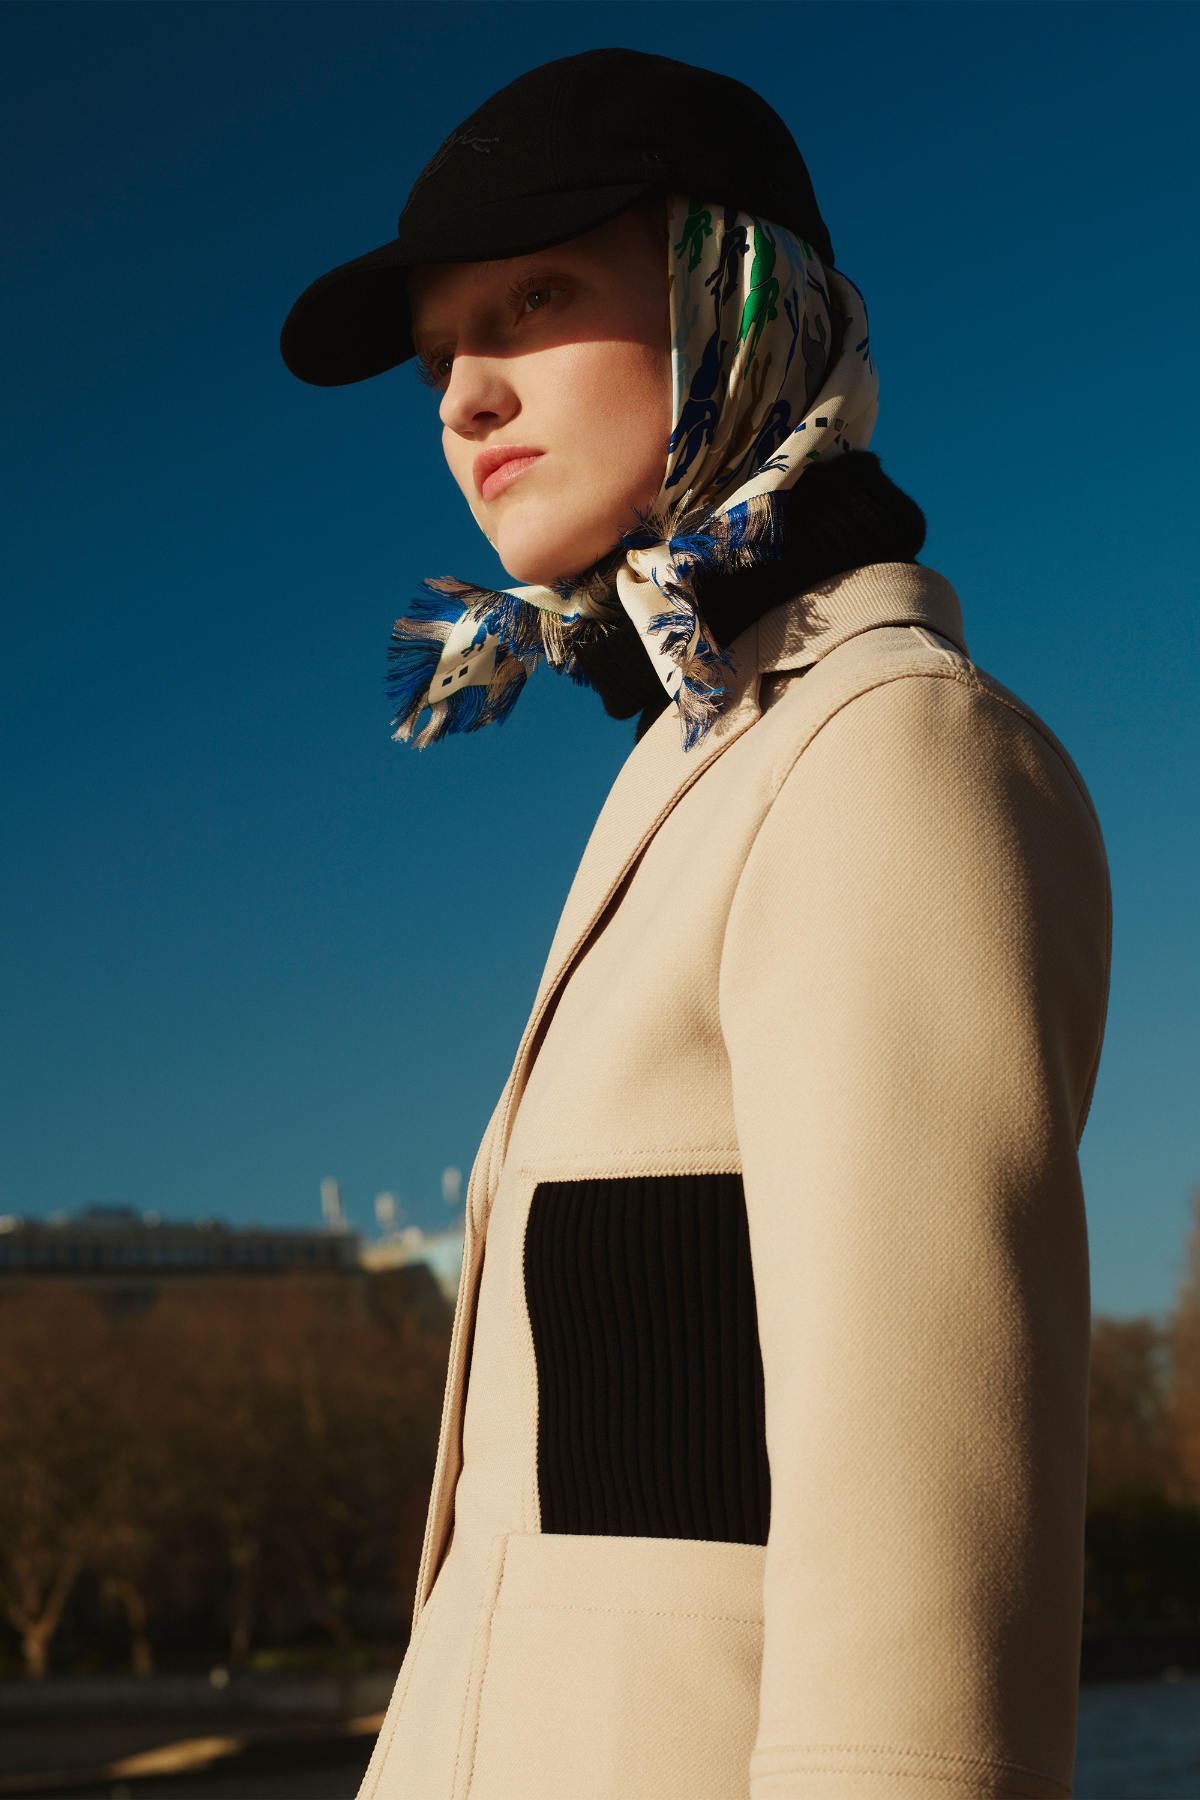 Longchamp Presents Its New Fall/Winter 2022 Ready-To-Wear Collection: Rendez-Vous Au Sommet